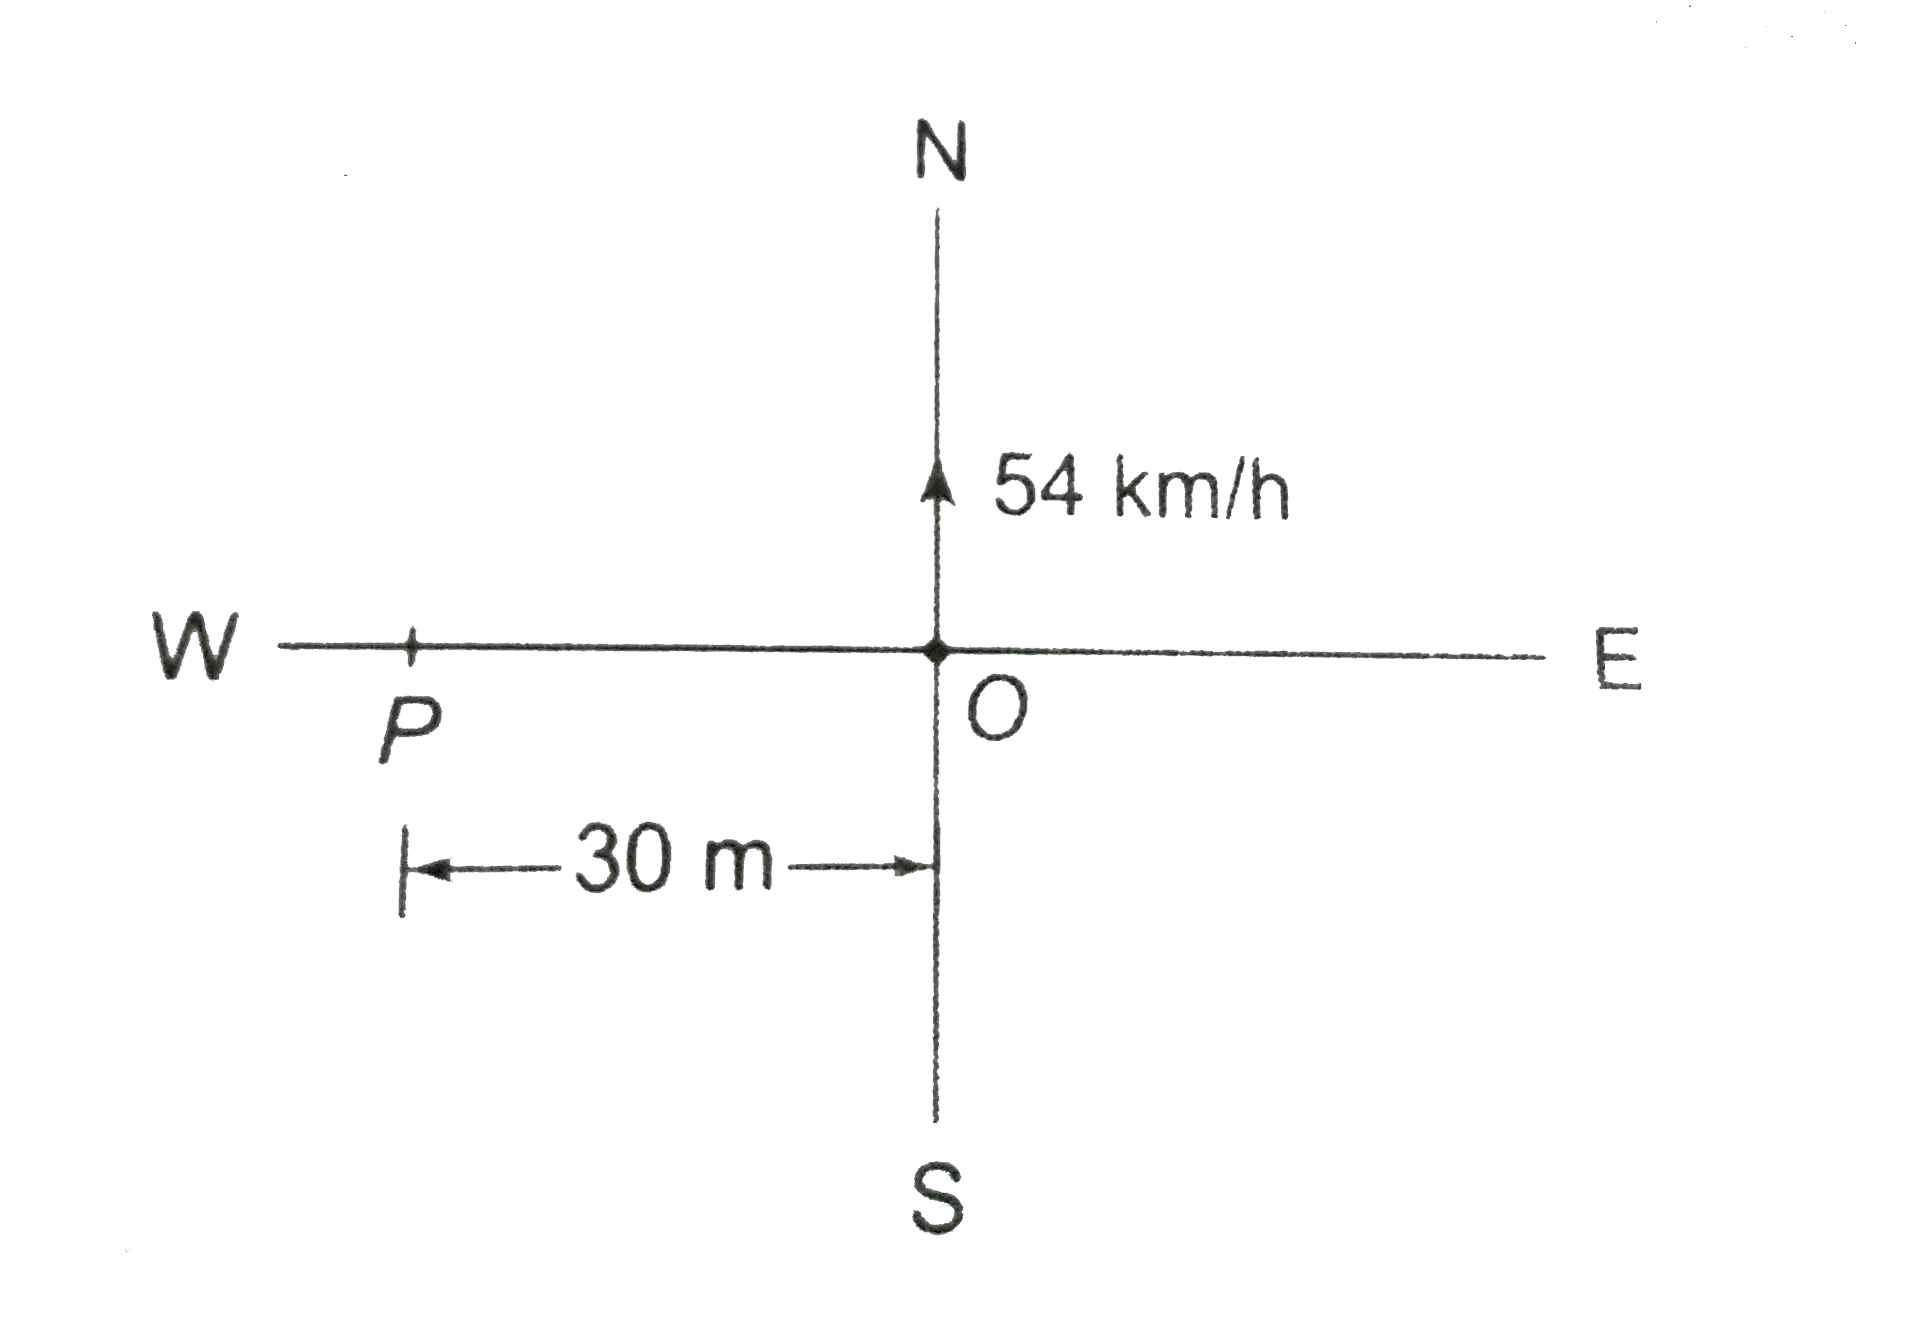 A verticle is moving due north with an absolute velocity 54 km//h. An observer at P is at distance 30 m to the west of the line of travel. What is the angular velocity of vehicle relative to the observer at t=0 and t=2 s.